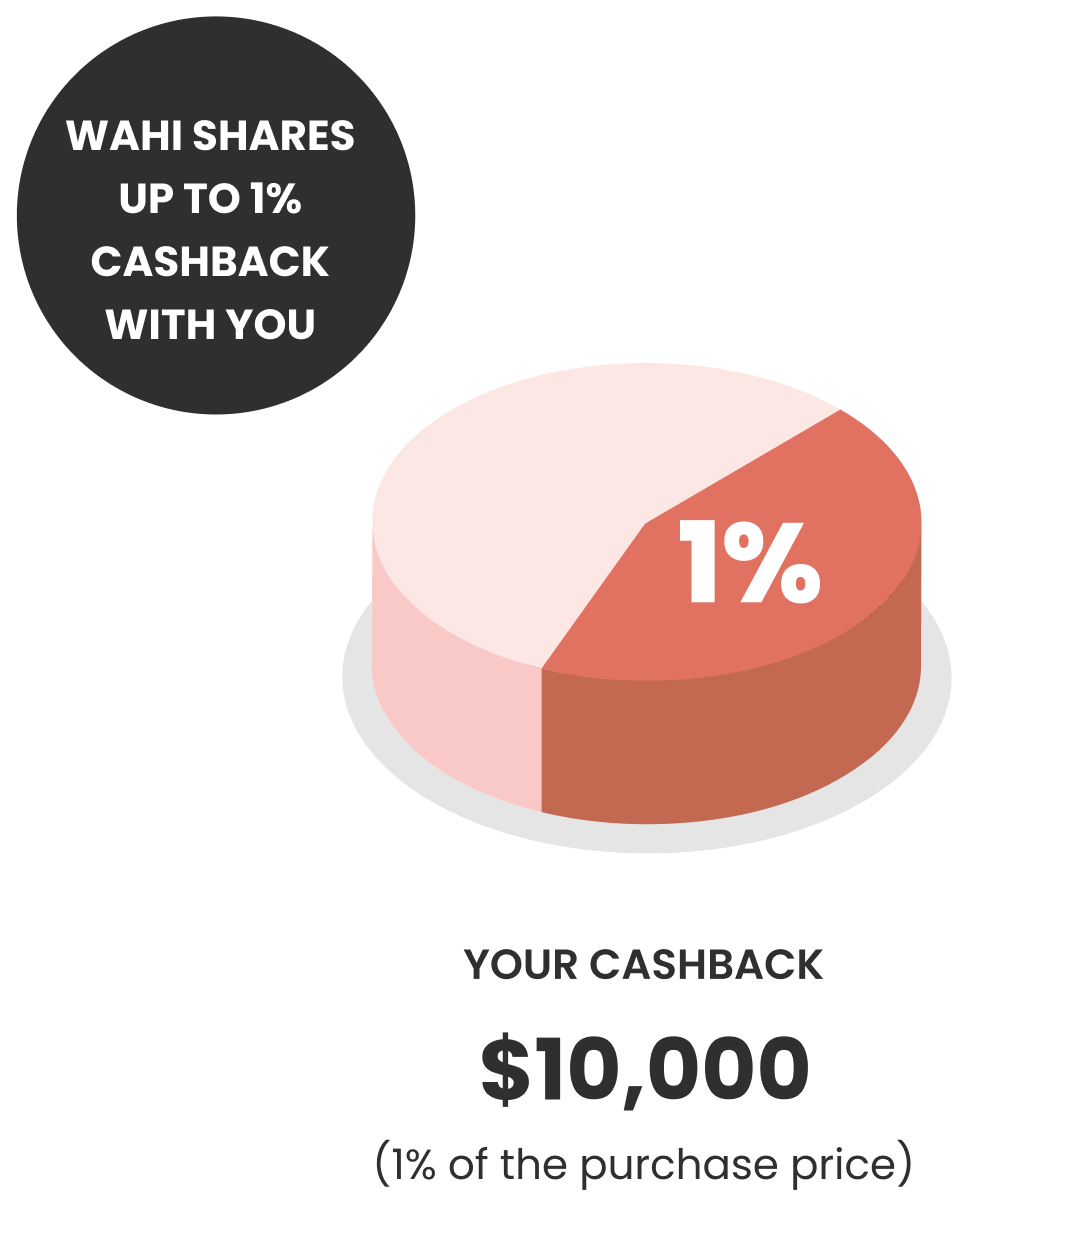 Wahi shares up to 1% cashback with you